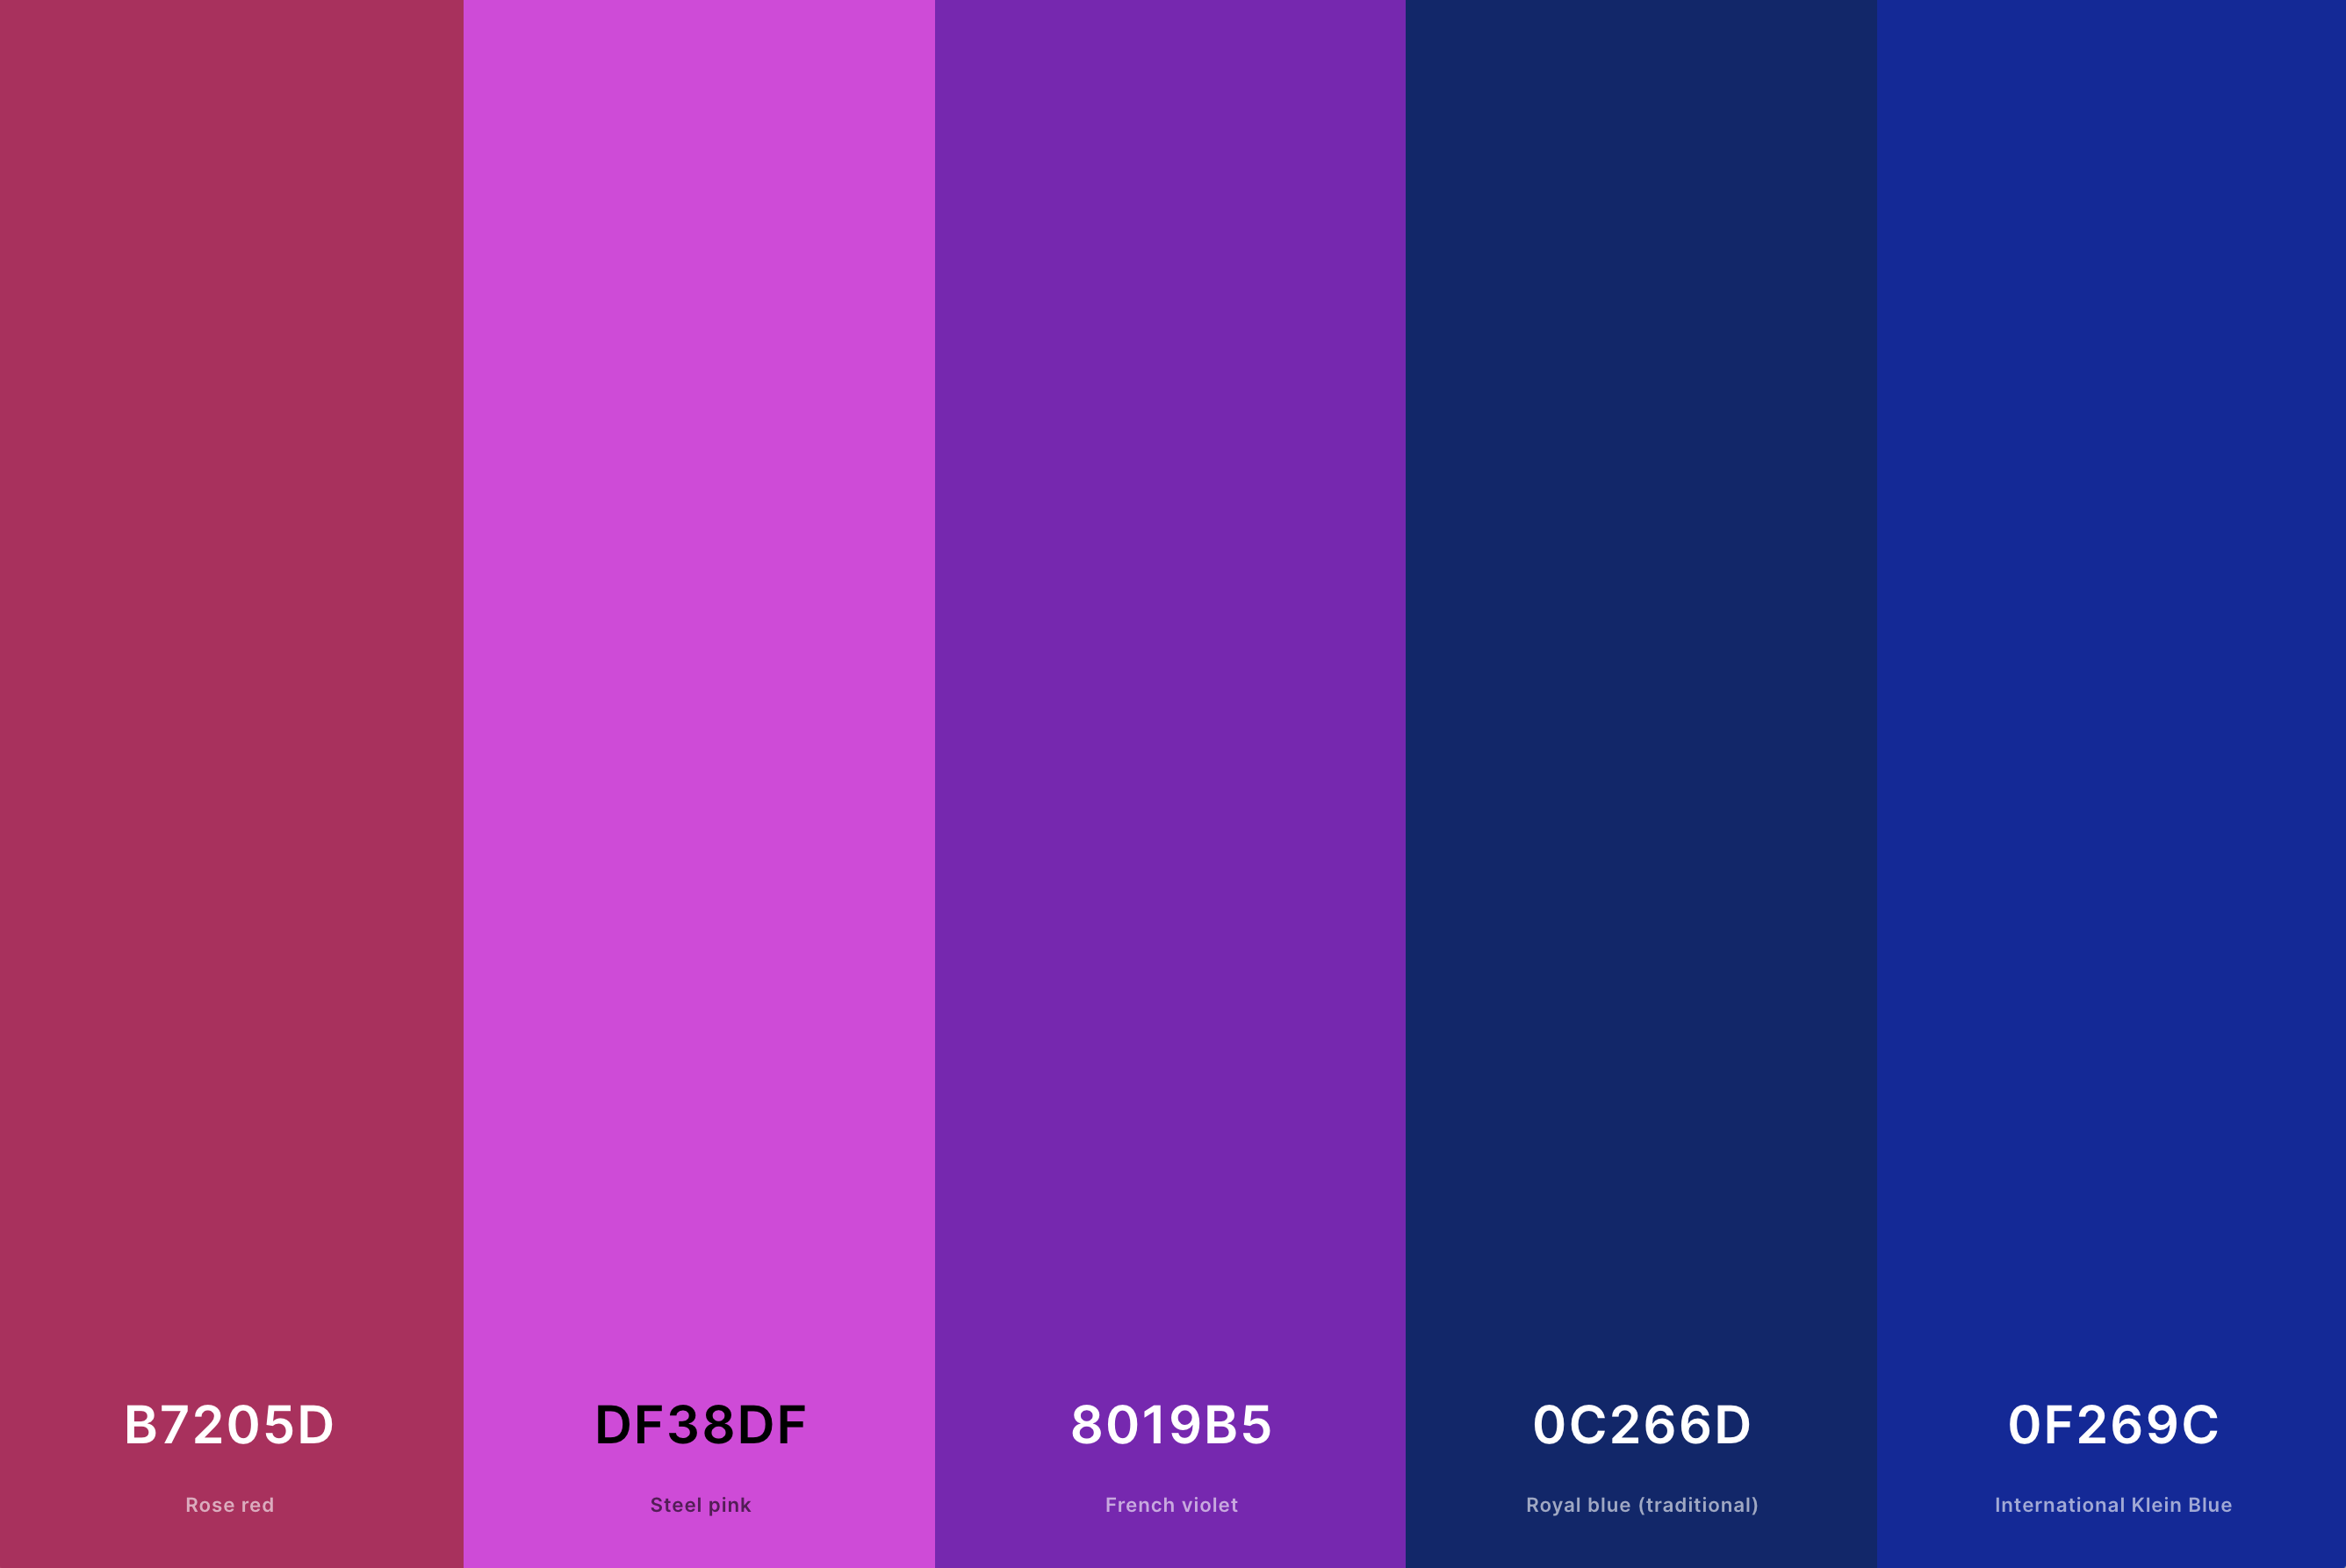 25. Magenta And Navy Blue Color Palette Color Palette with Rose Red (Hex #B7205D) + Steel Pink (Hex #DF38DF) + French Violet (Hex #8019B5) + Royal Blue (Traditional) (Hex #0C266D) + International Klein Blue (Hex #0F269C) Color Palette with Hex Codes